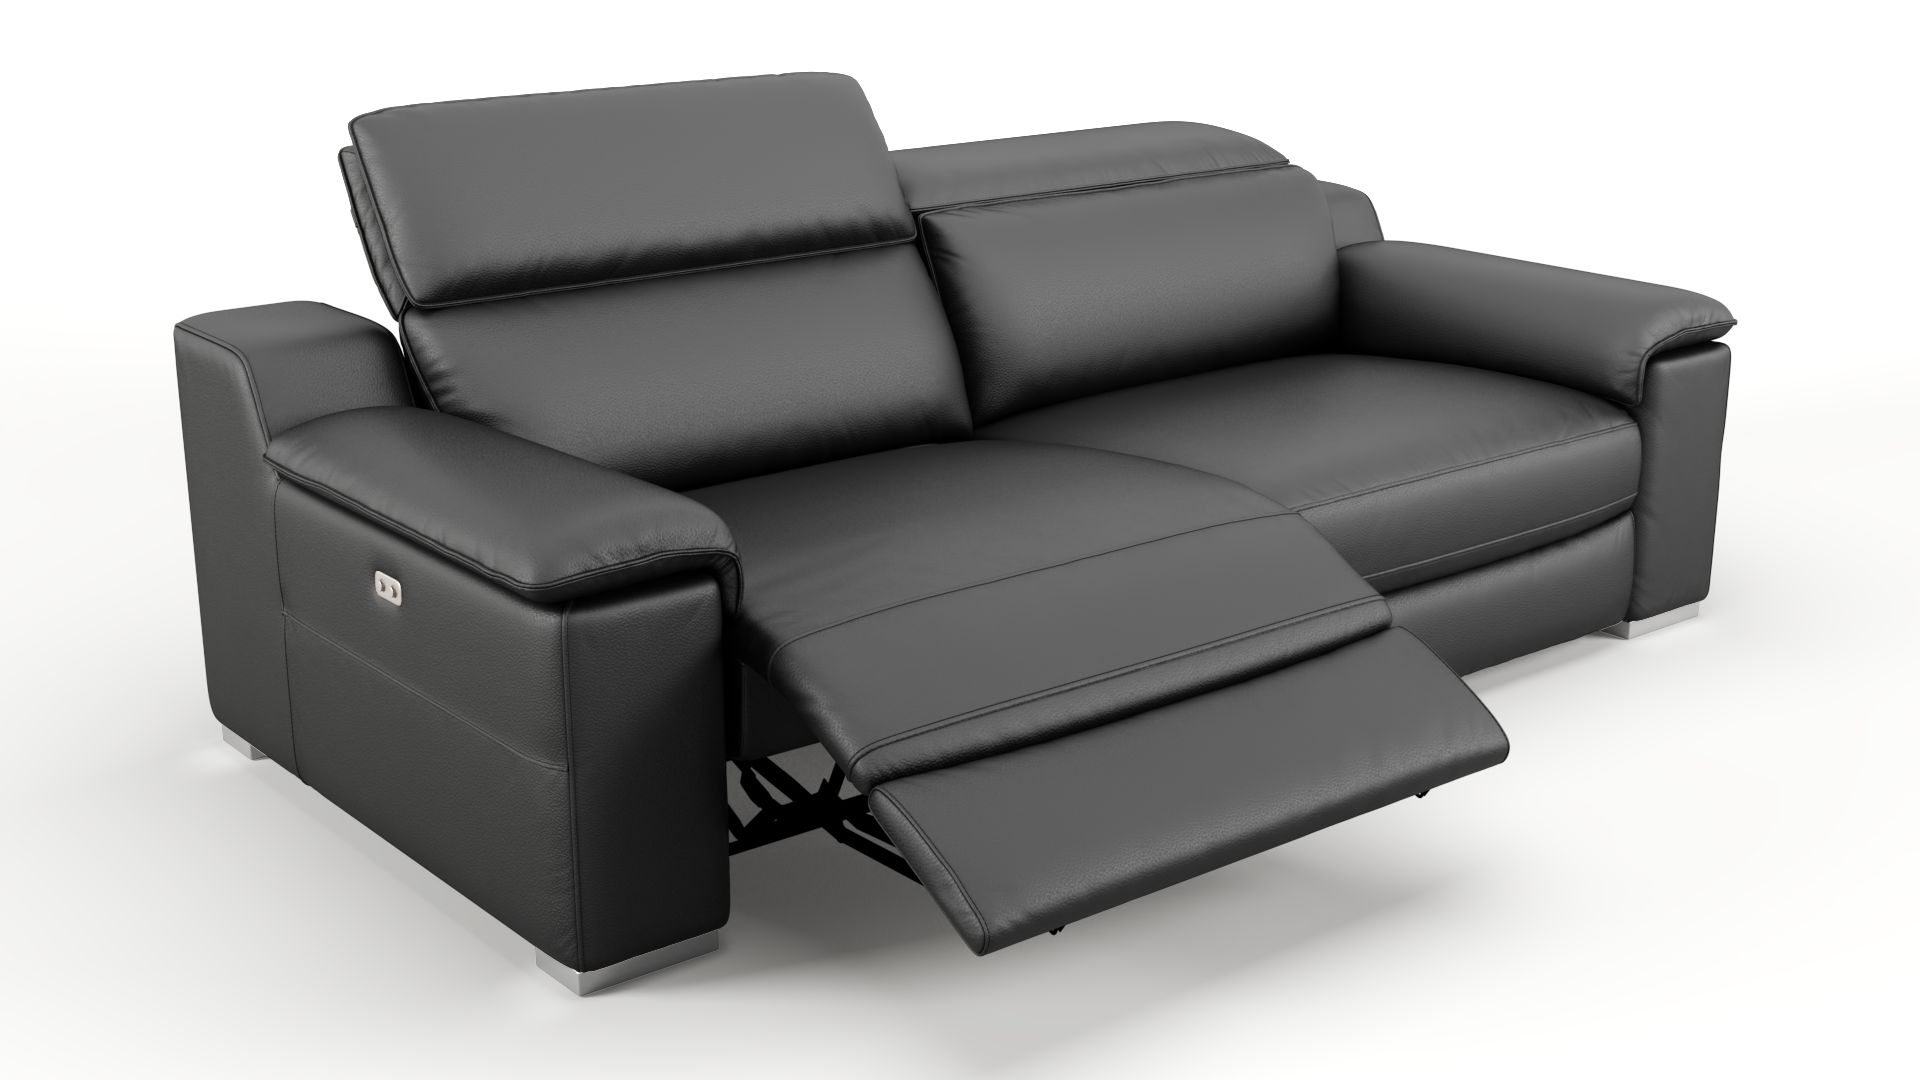 Sofa Dreisitzer Mit Relaxfunktion / Couch Relaxfunktion : Eckcouch